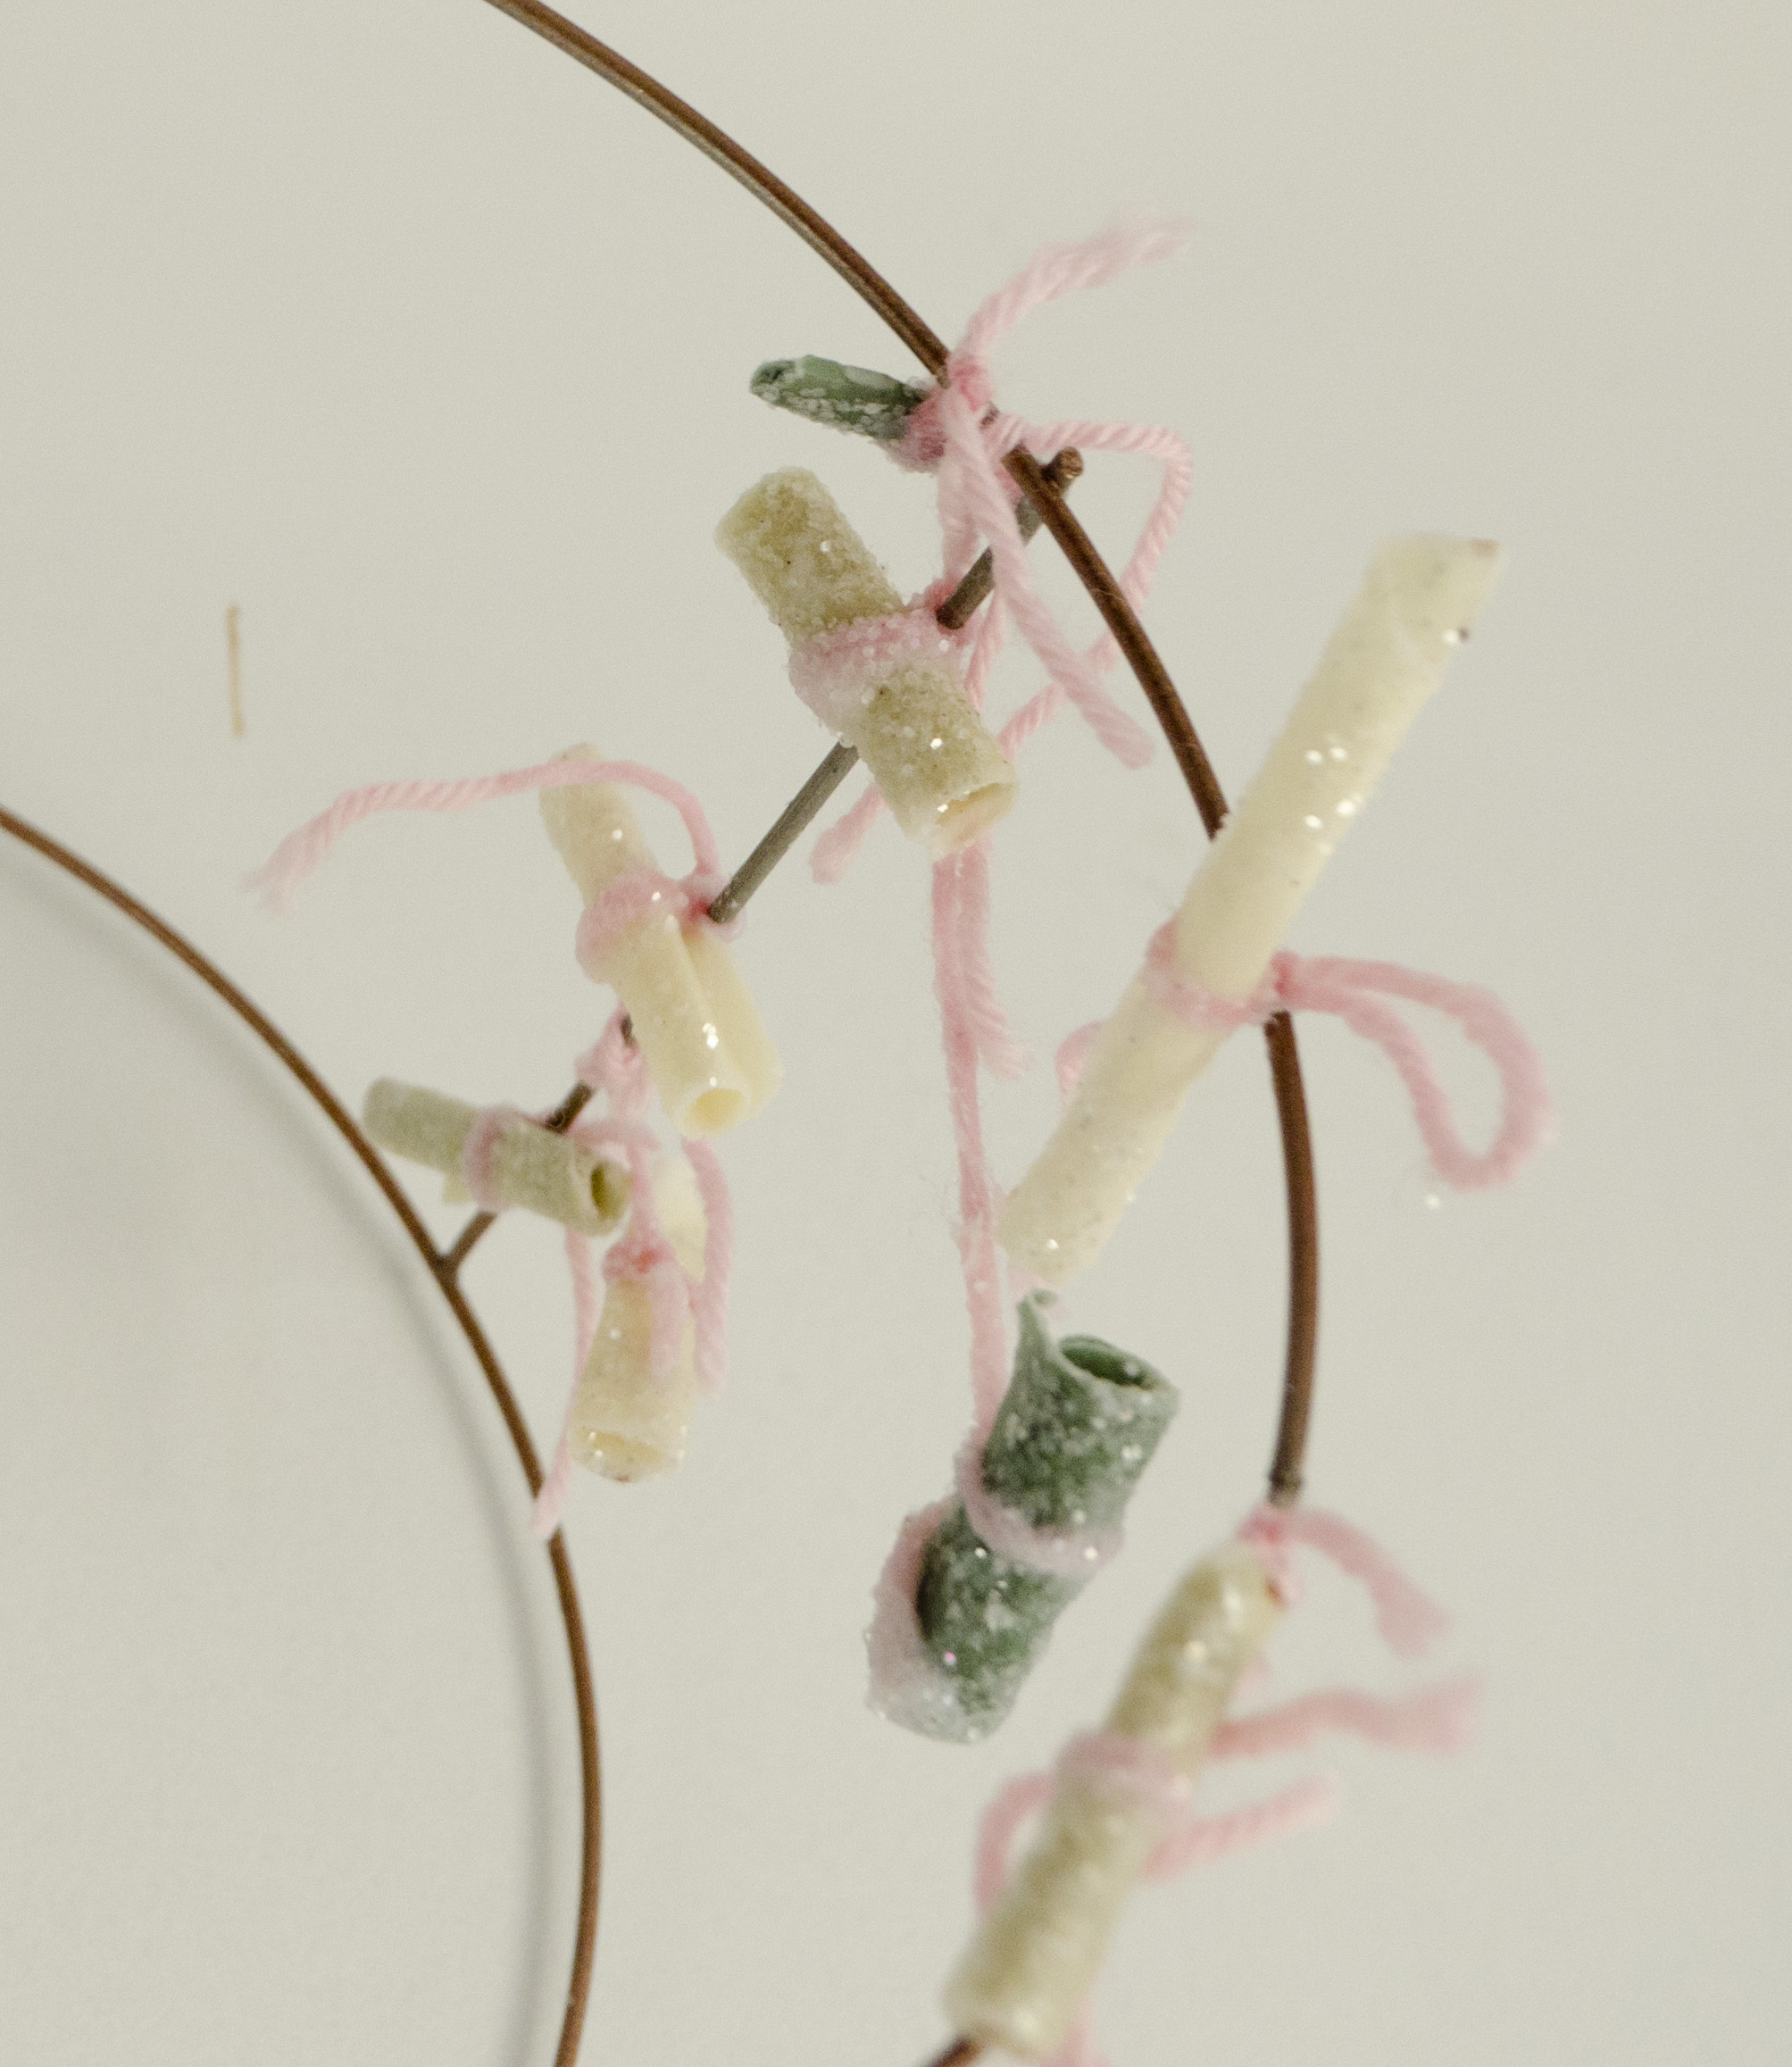   For Protection and Affection  (Detail)  2018  Wax, herbs, glitter, yarn, pencil, and paper, on wire armature  the artifact from the performance piece, containing the charms made during the event 